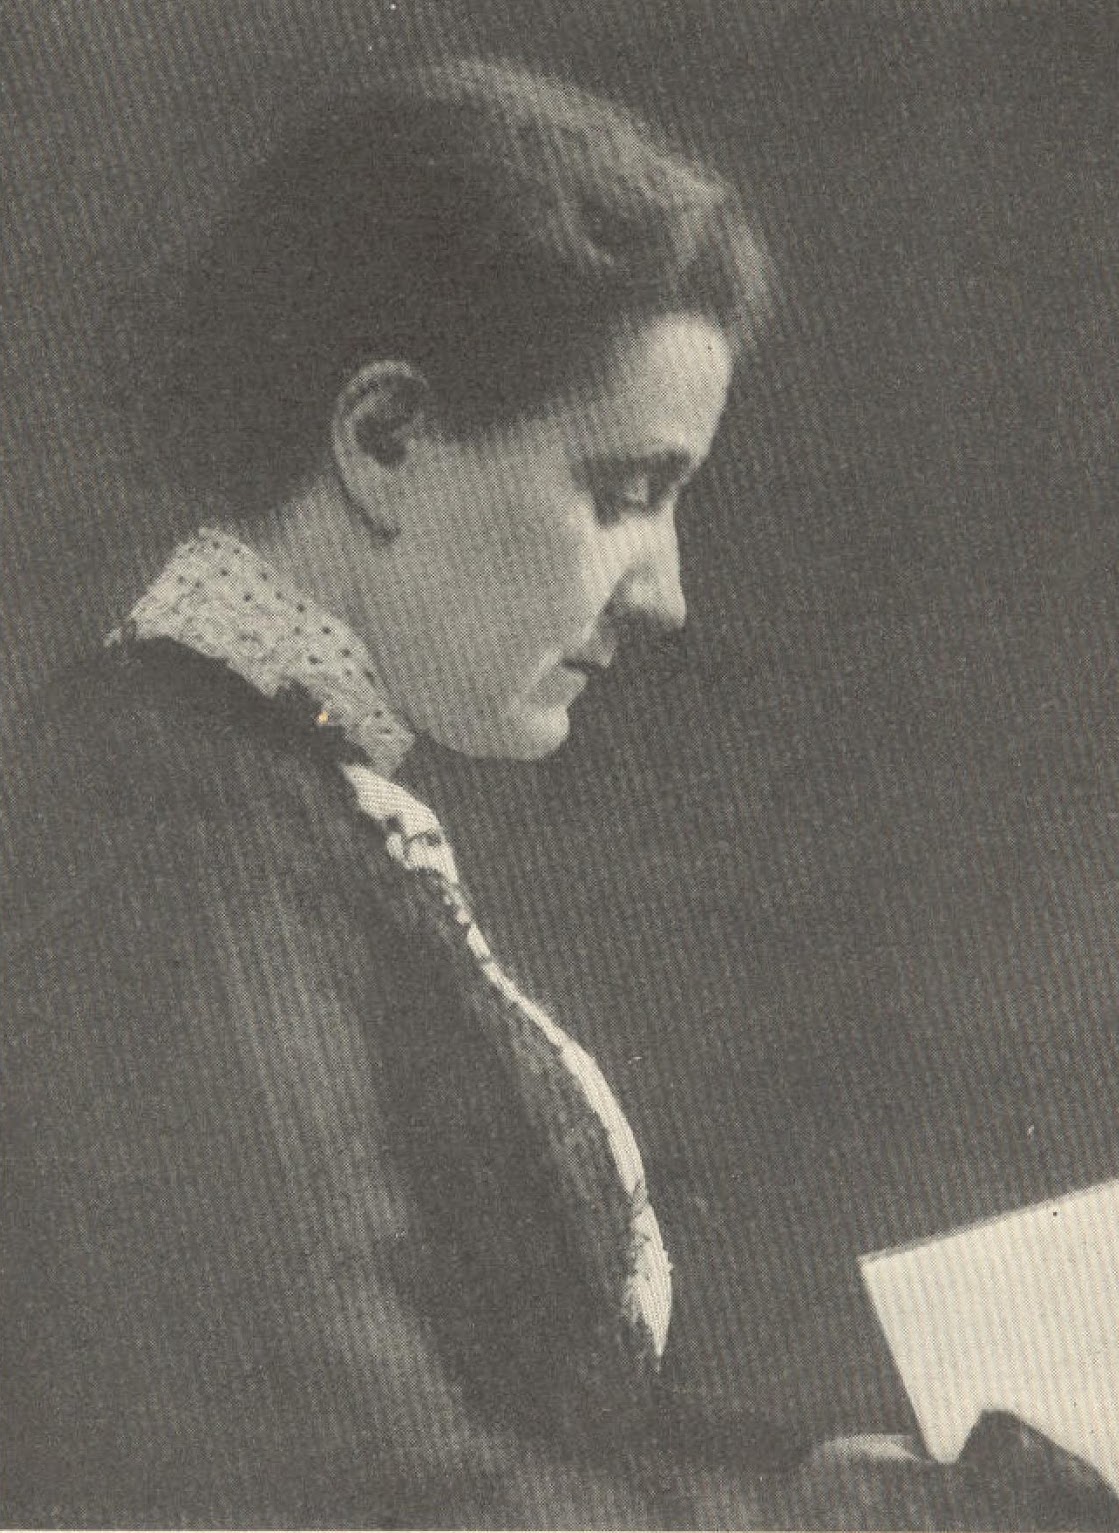 A woman in profile looking down at a book in her hands.